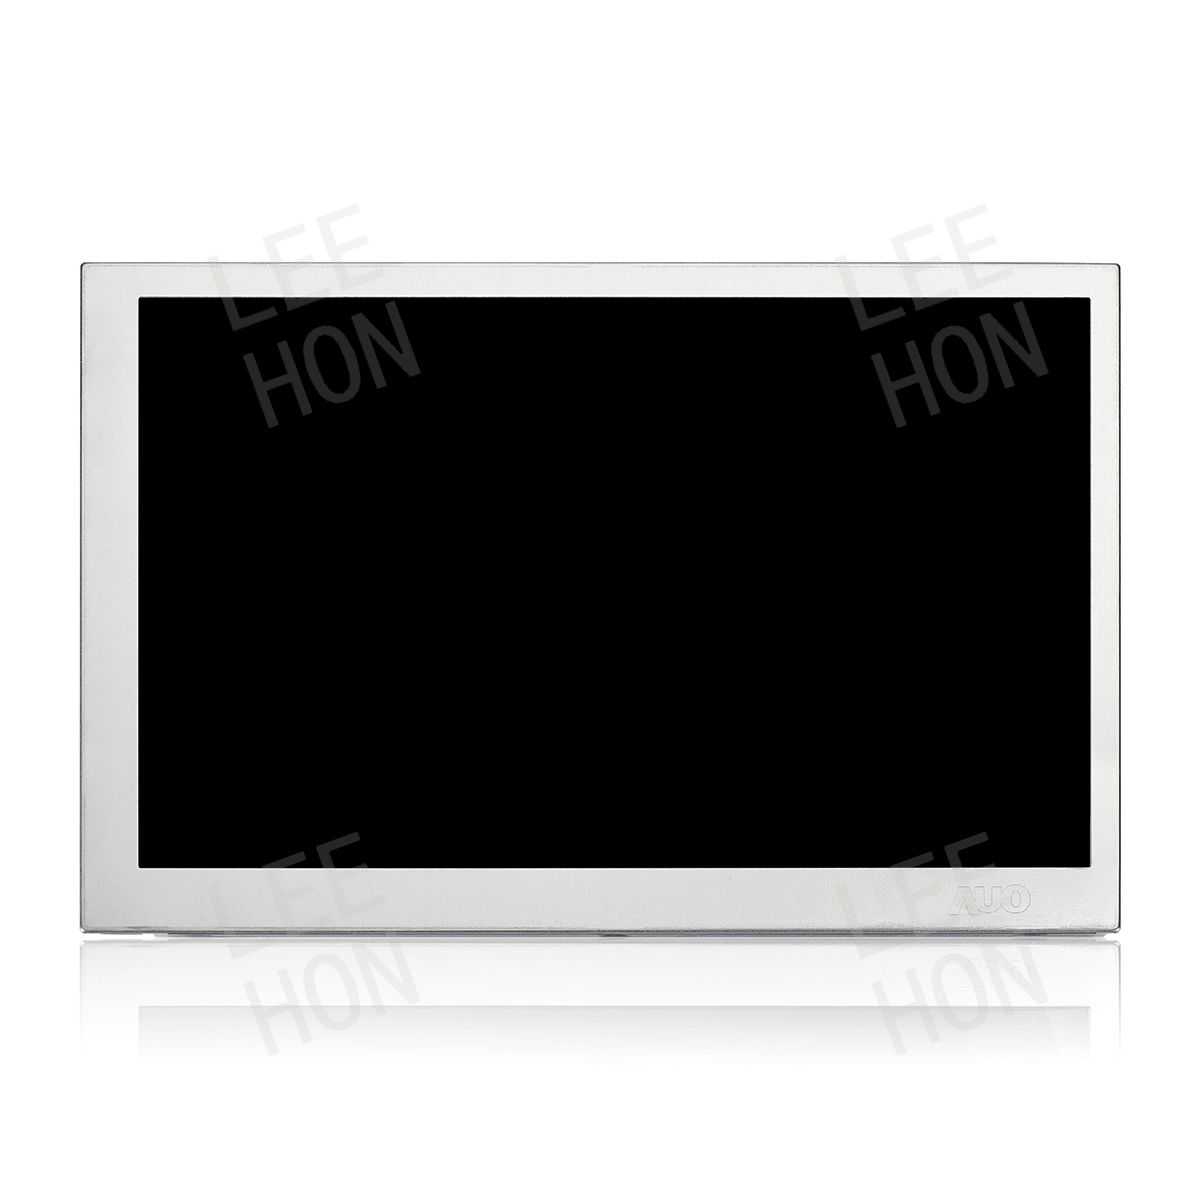 <b>AUO 7 Inch 800x480 WVGA LCD Panel For Industry G070VW01 V0 400nits and LVDS 20 pins</b>